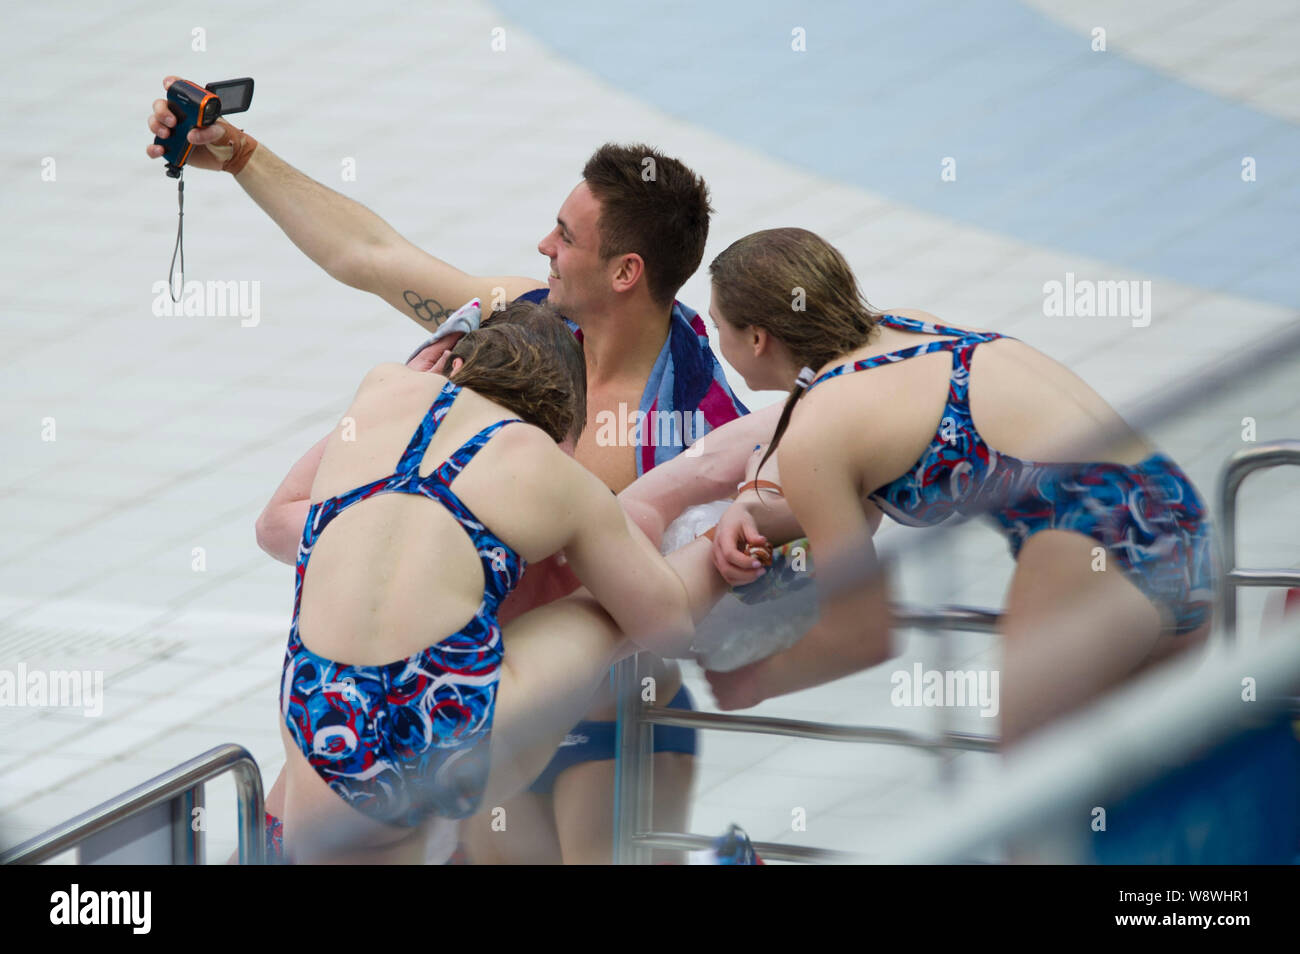 English diver Tomas Daley, back, takes selfies with female teammates during a training session of the FINA/NVC Diving World Series 2014 at the Nationa Stock Photo